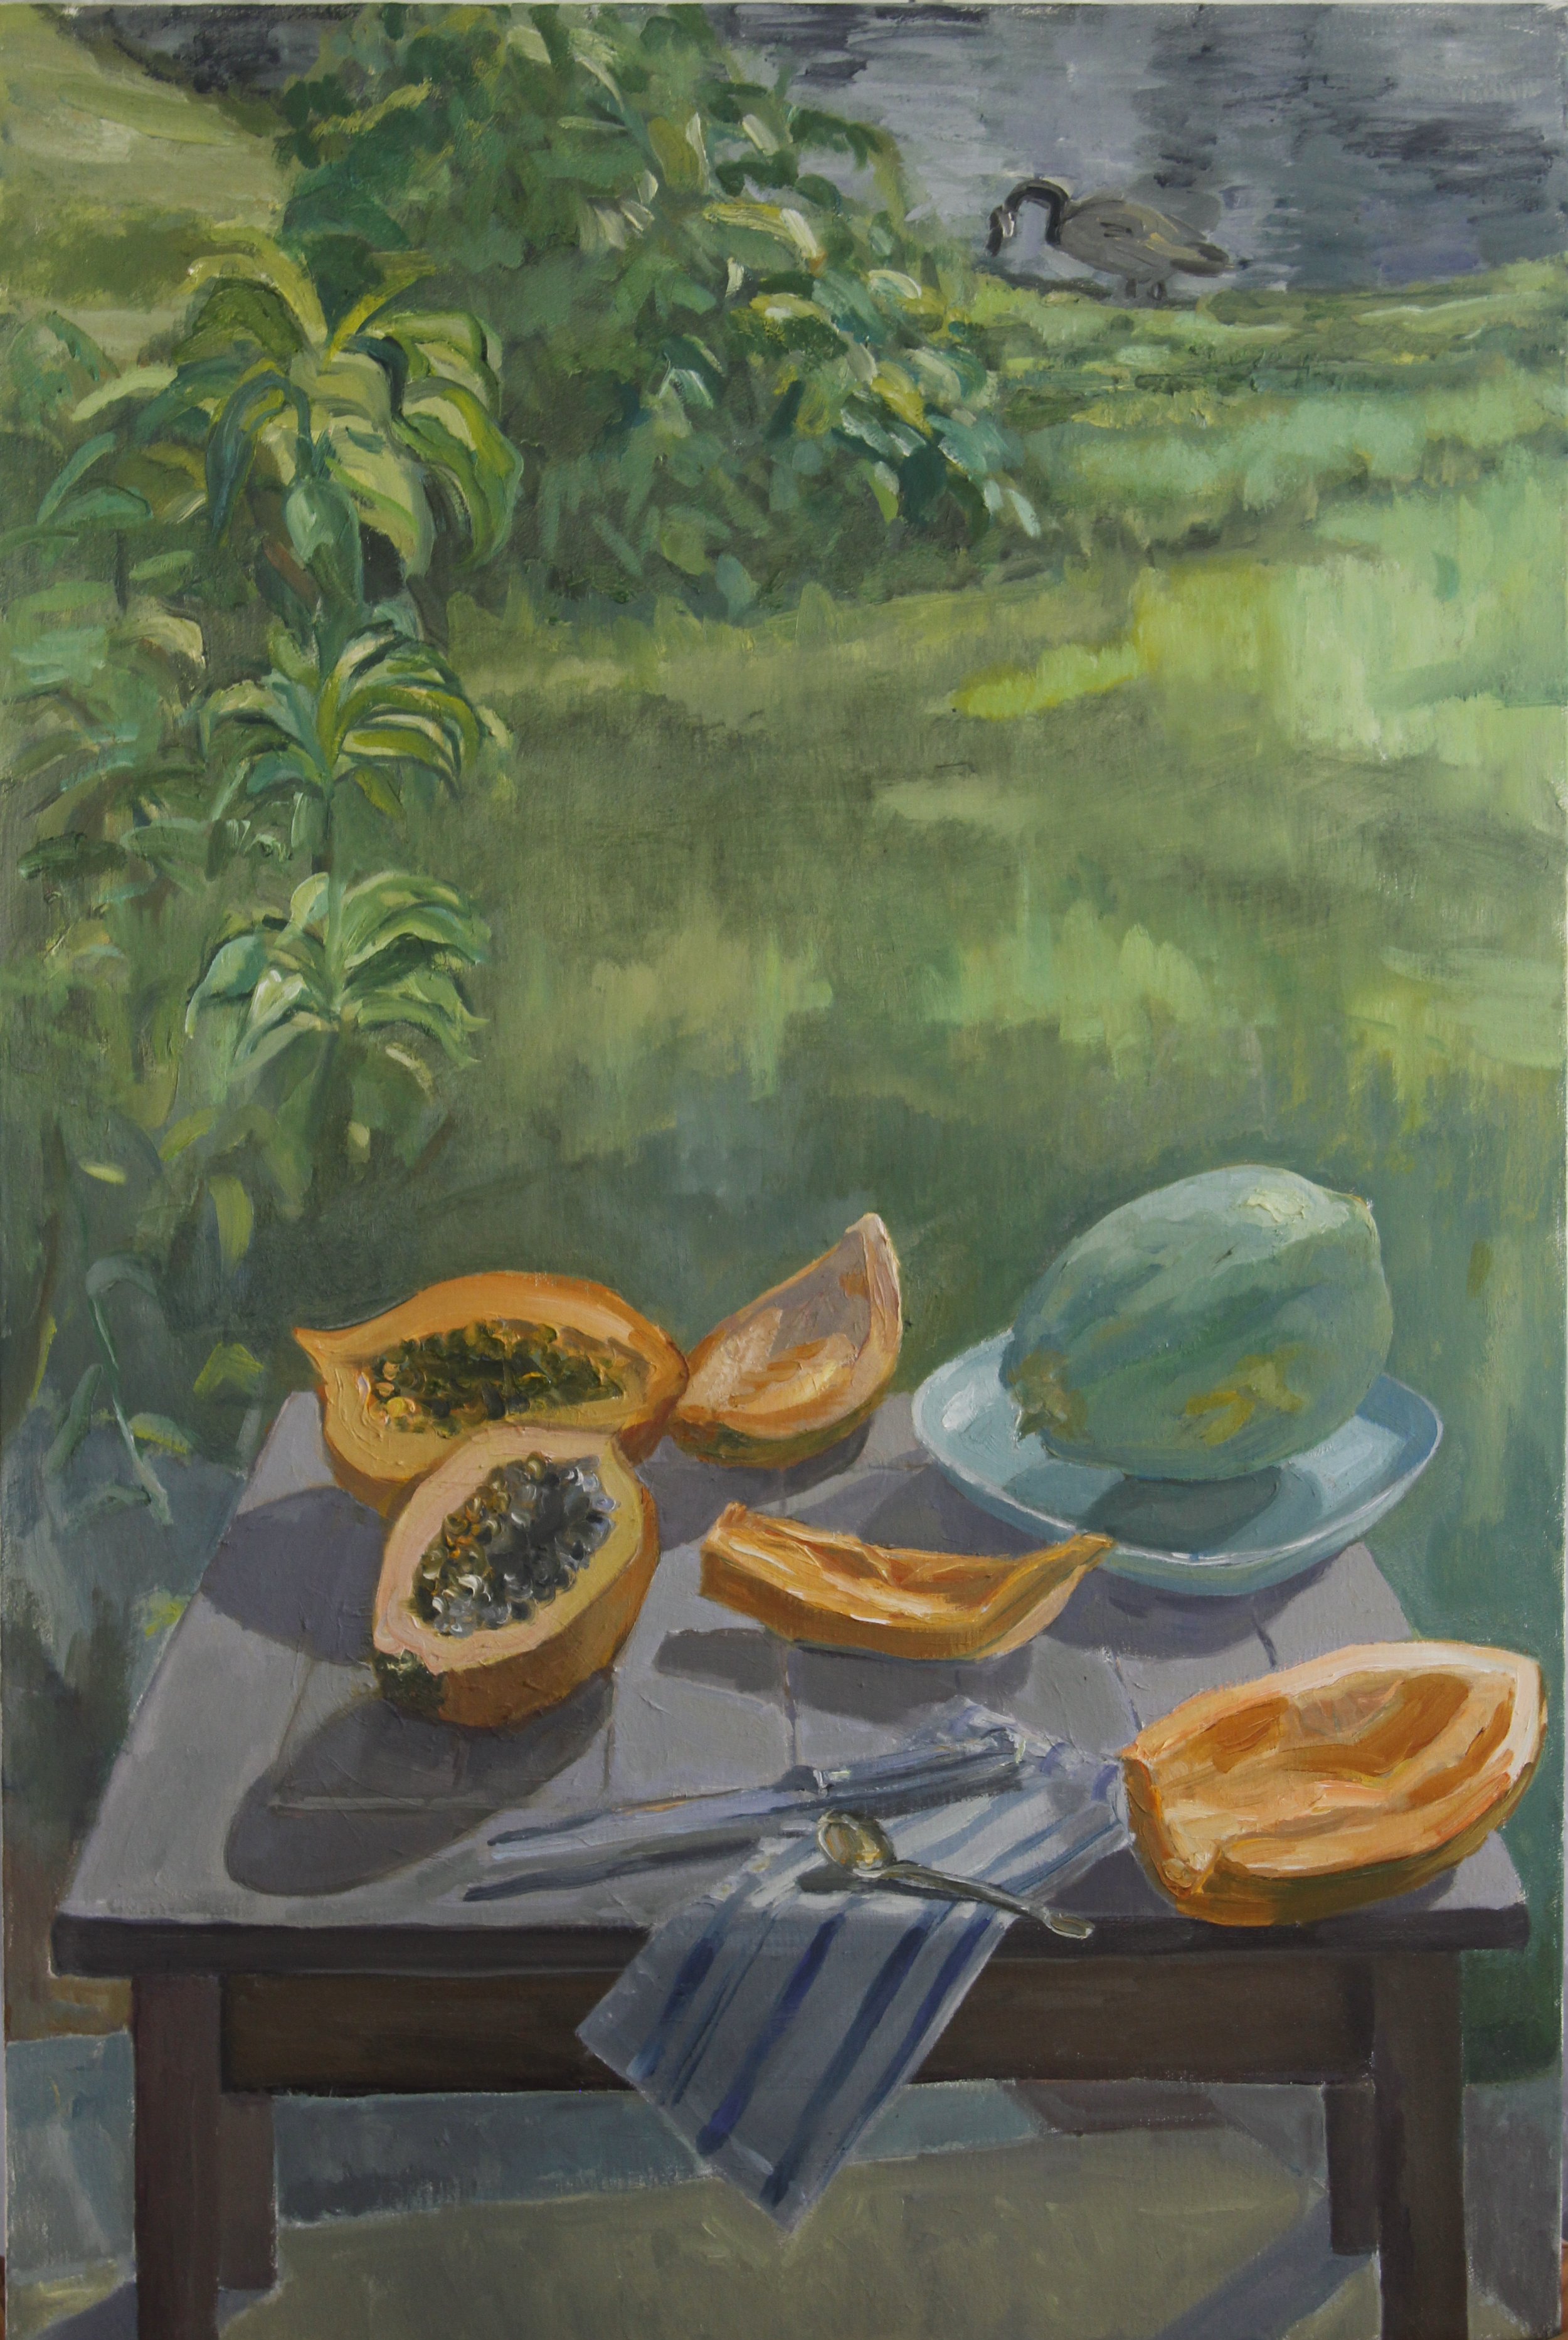 Papaya with Goose, 2022, Oil on linen, 36x24 inches.